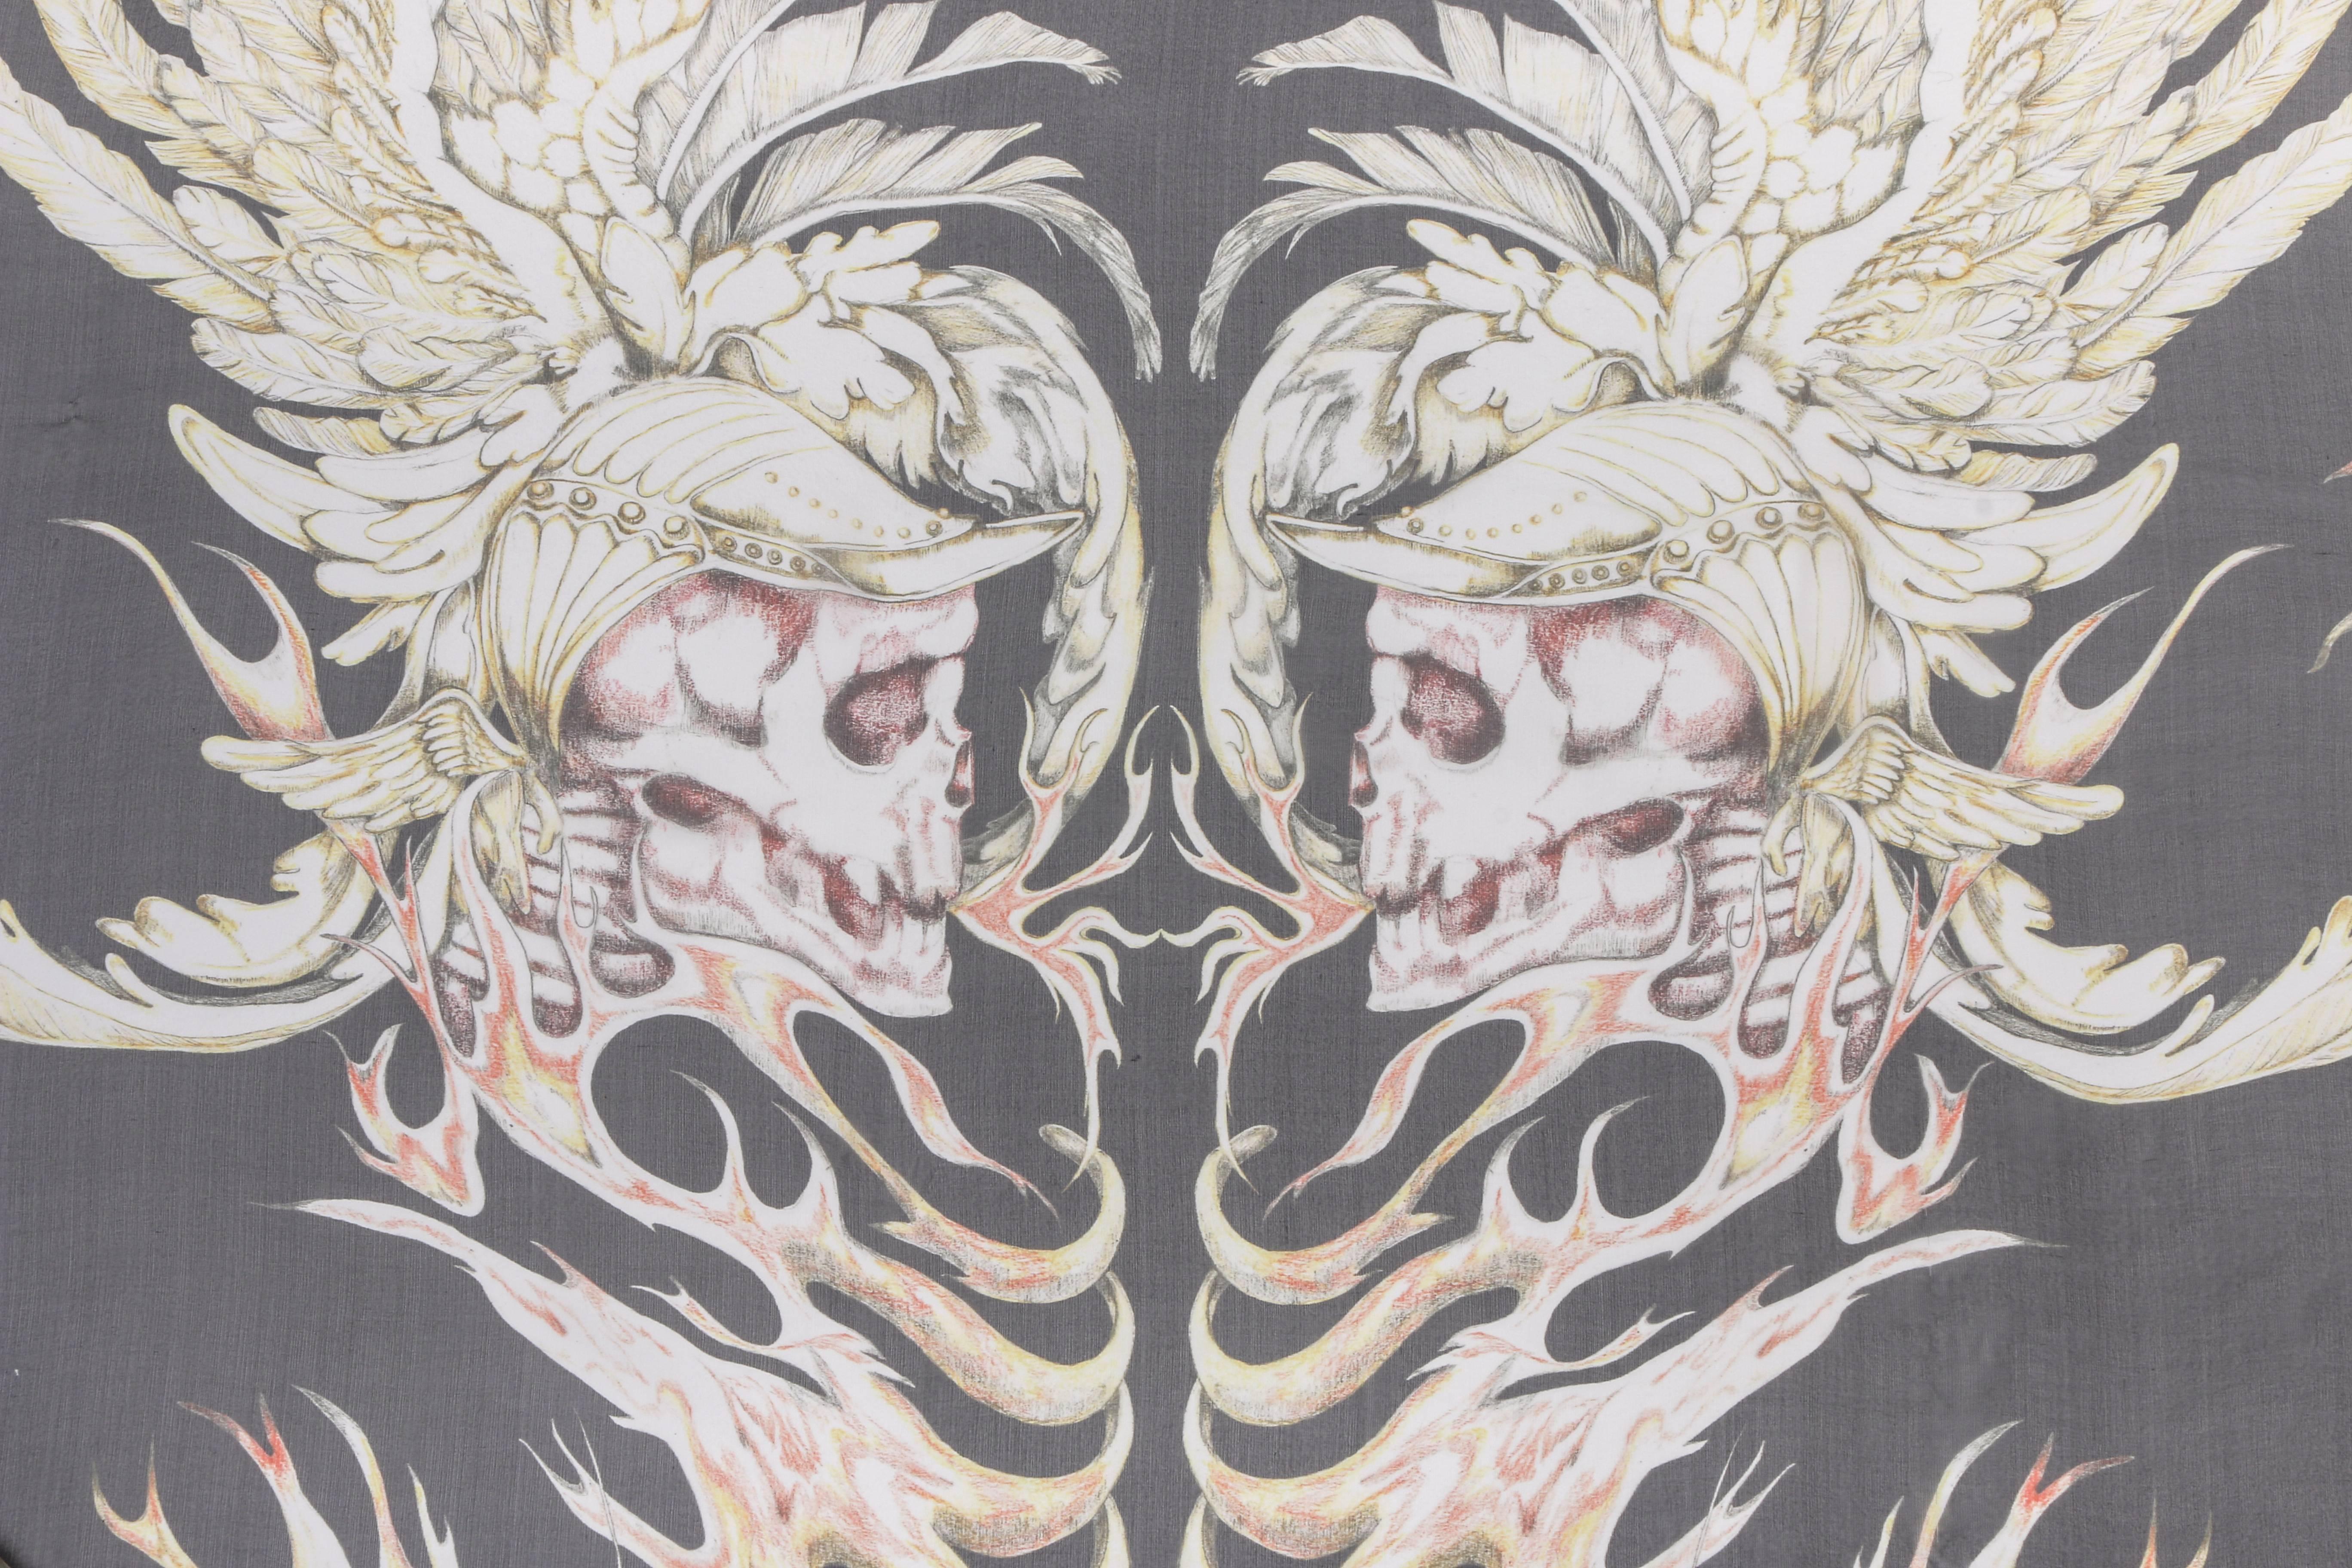 Rare Alexander McQueen A/W 2010 flaming skull print scarf. From Alexander McQueen's last collection, 